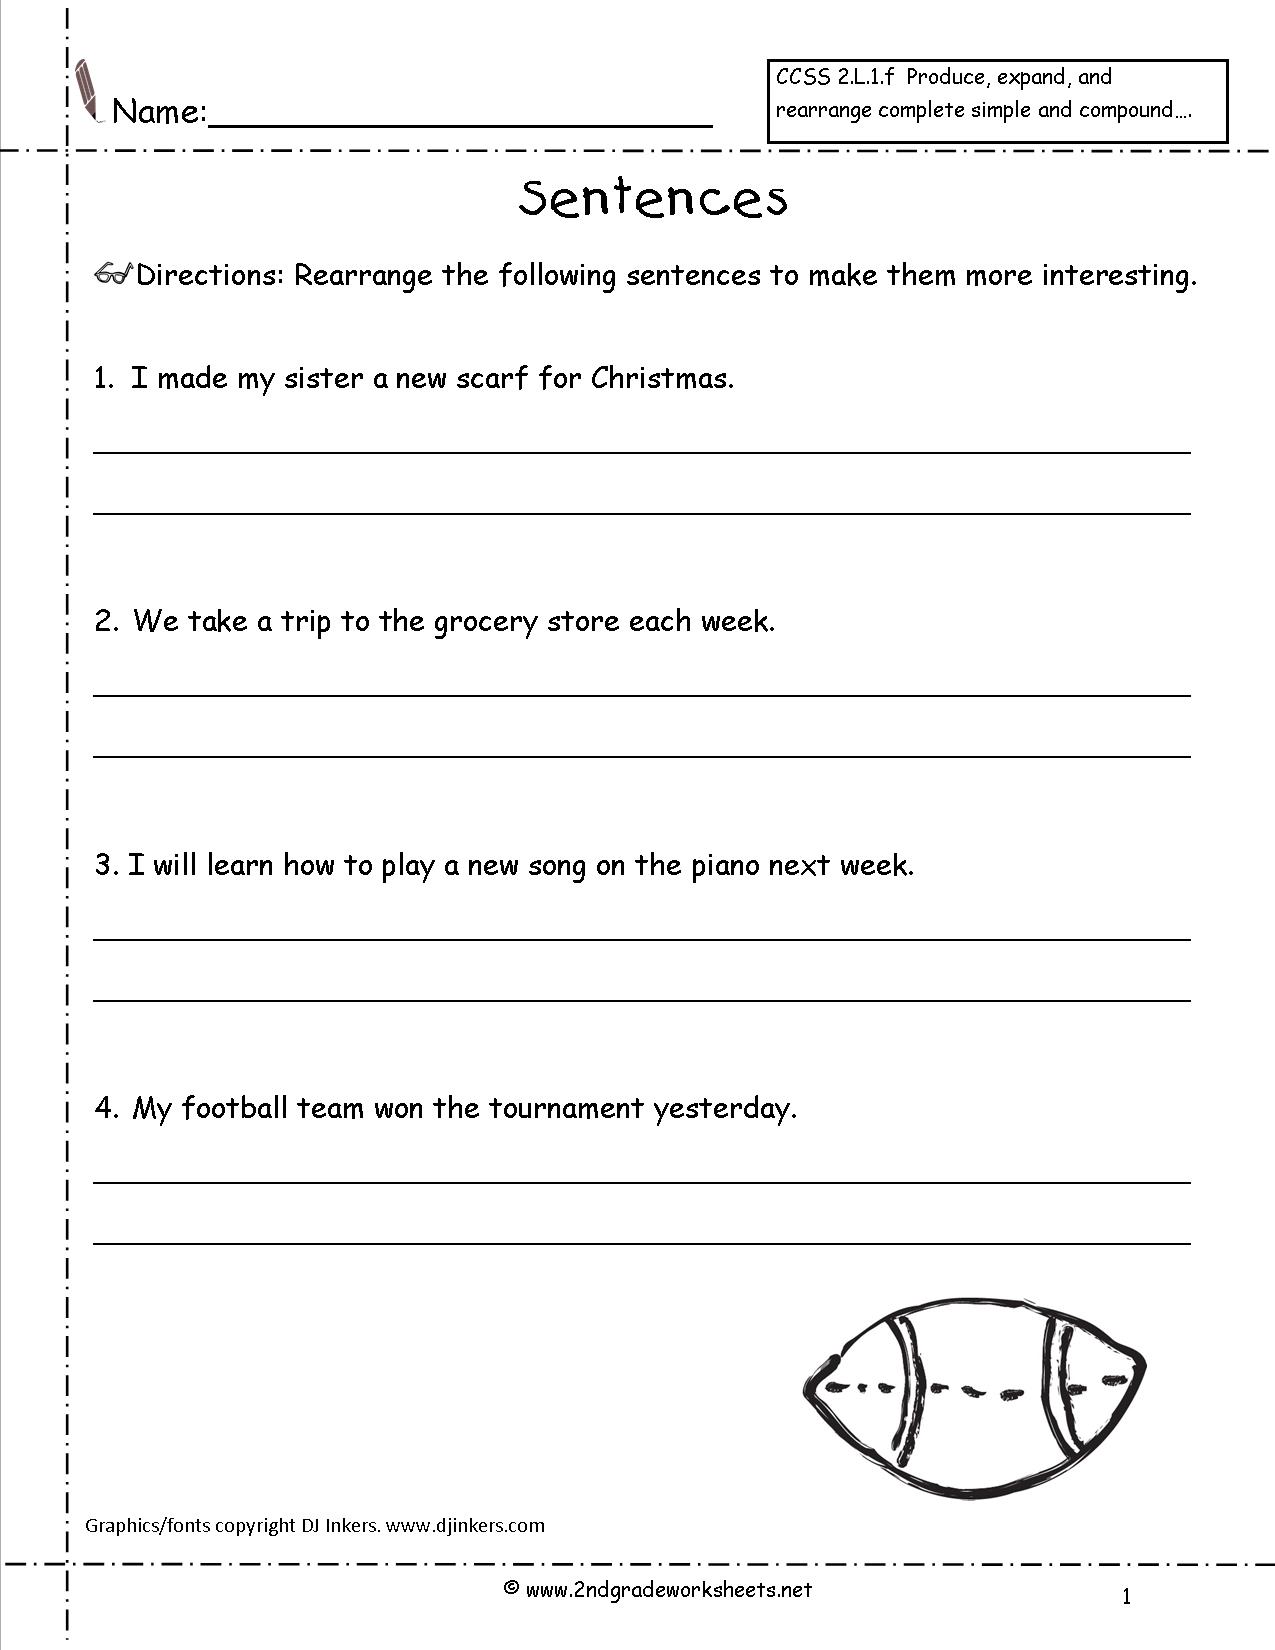 Practice Writing Complete Sentences Worksheets